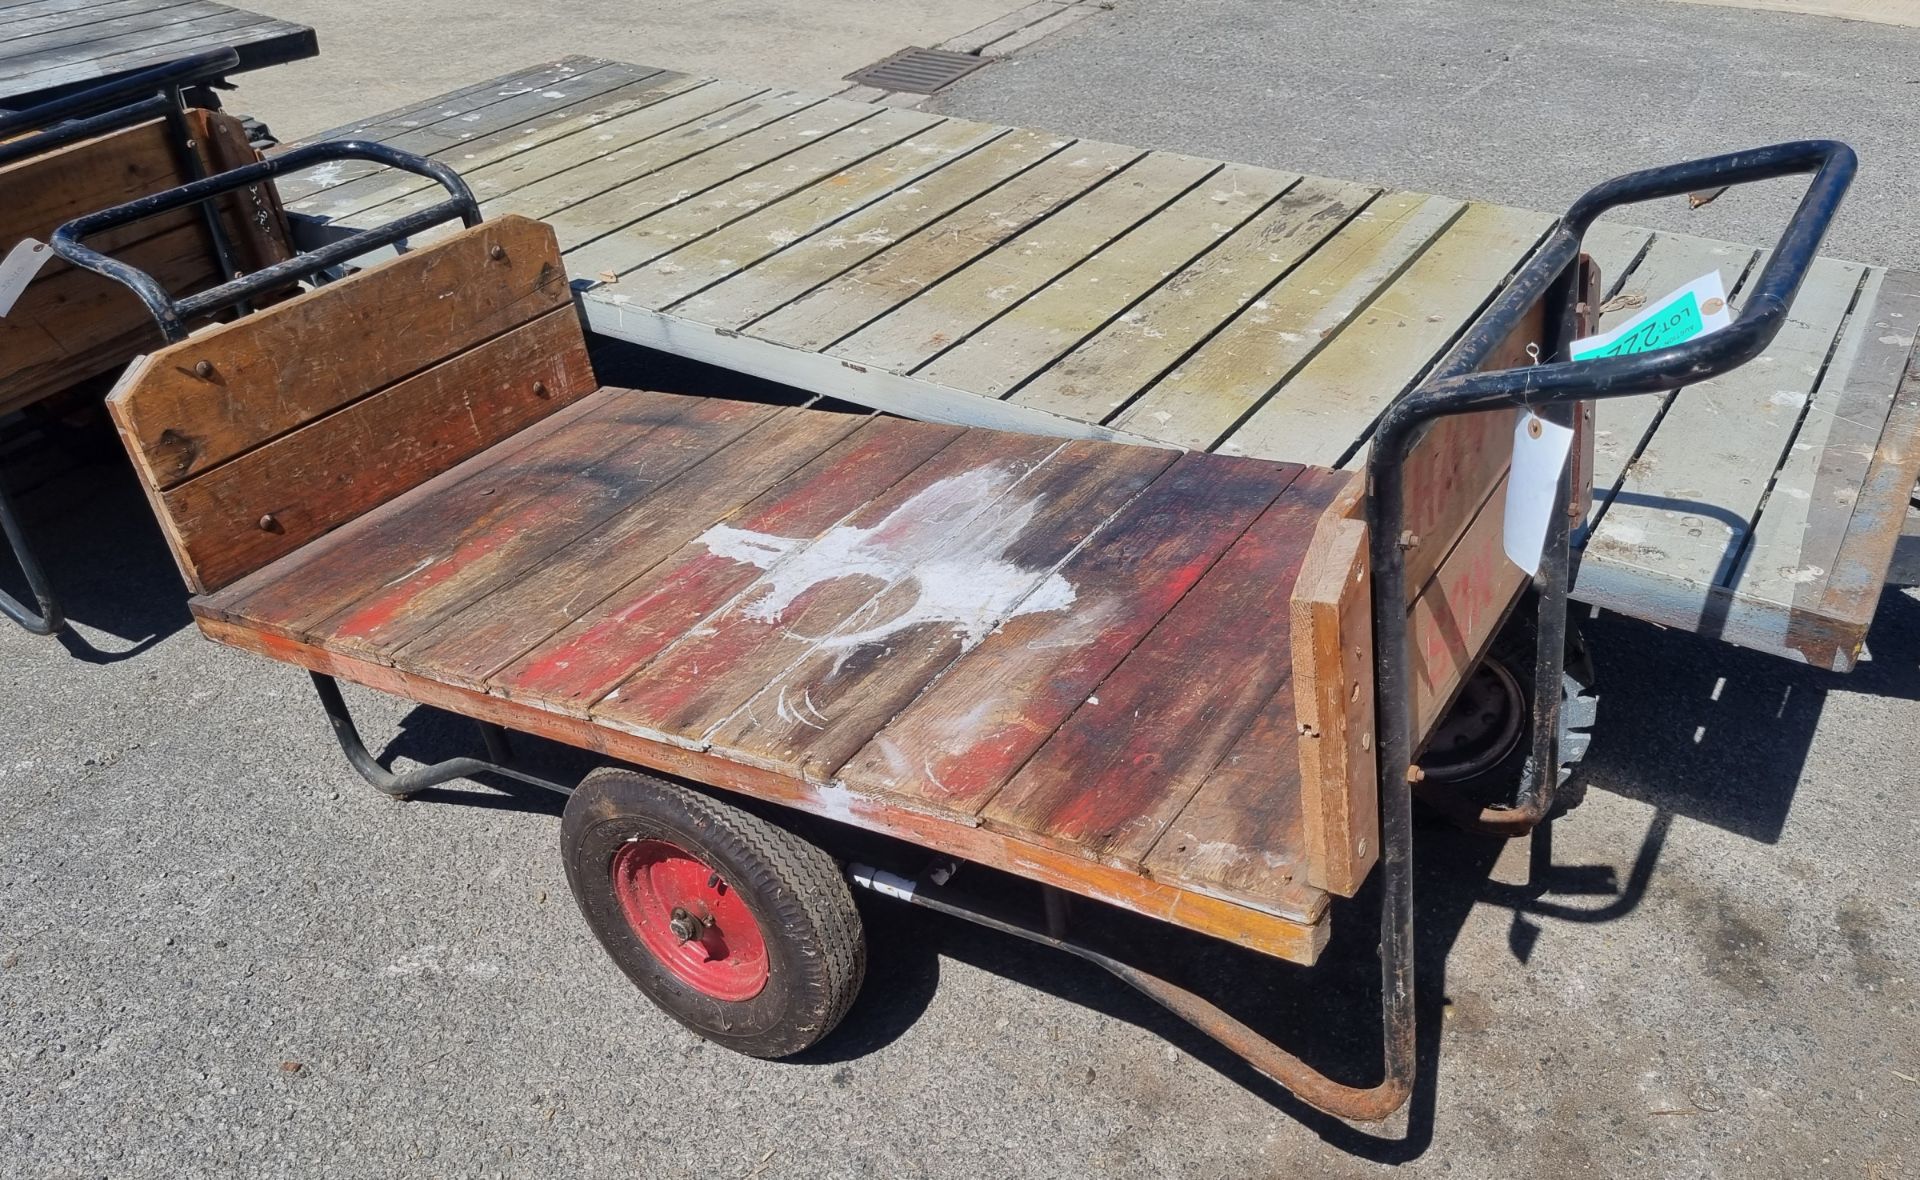 Bowley two wheeled barrow - no sides - bed length L1500mm (not including handles) - Image 2 of 3